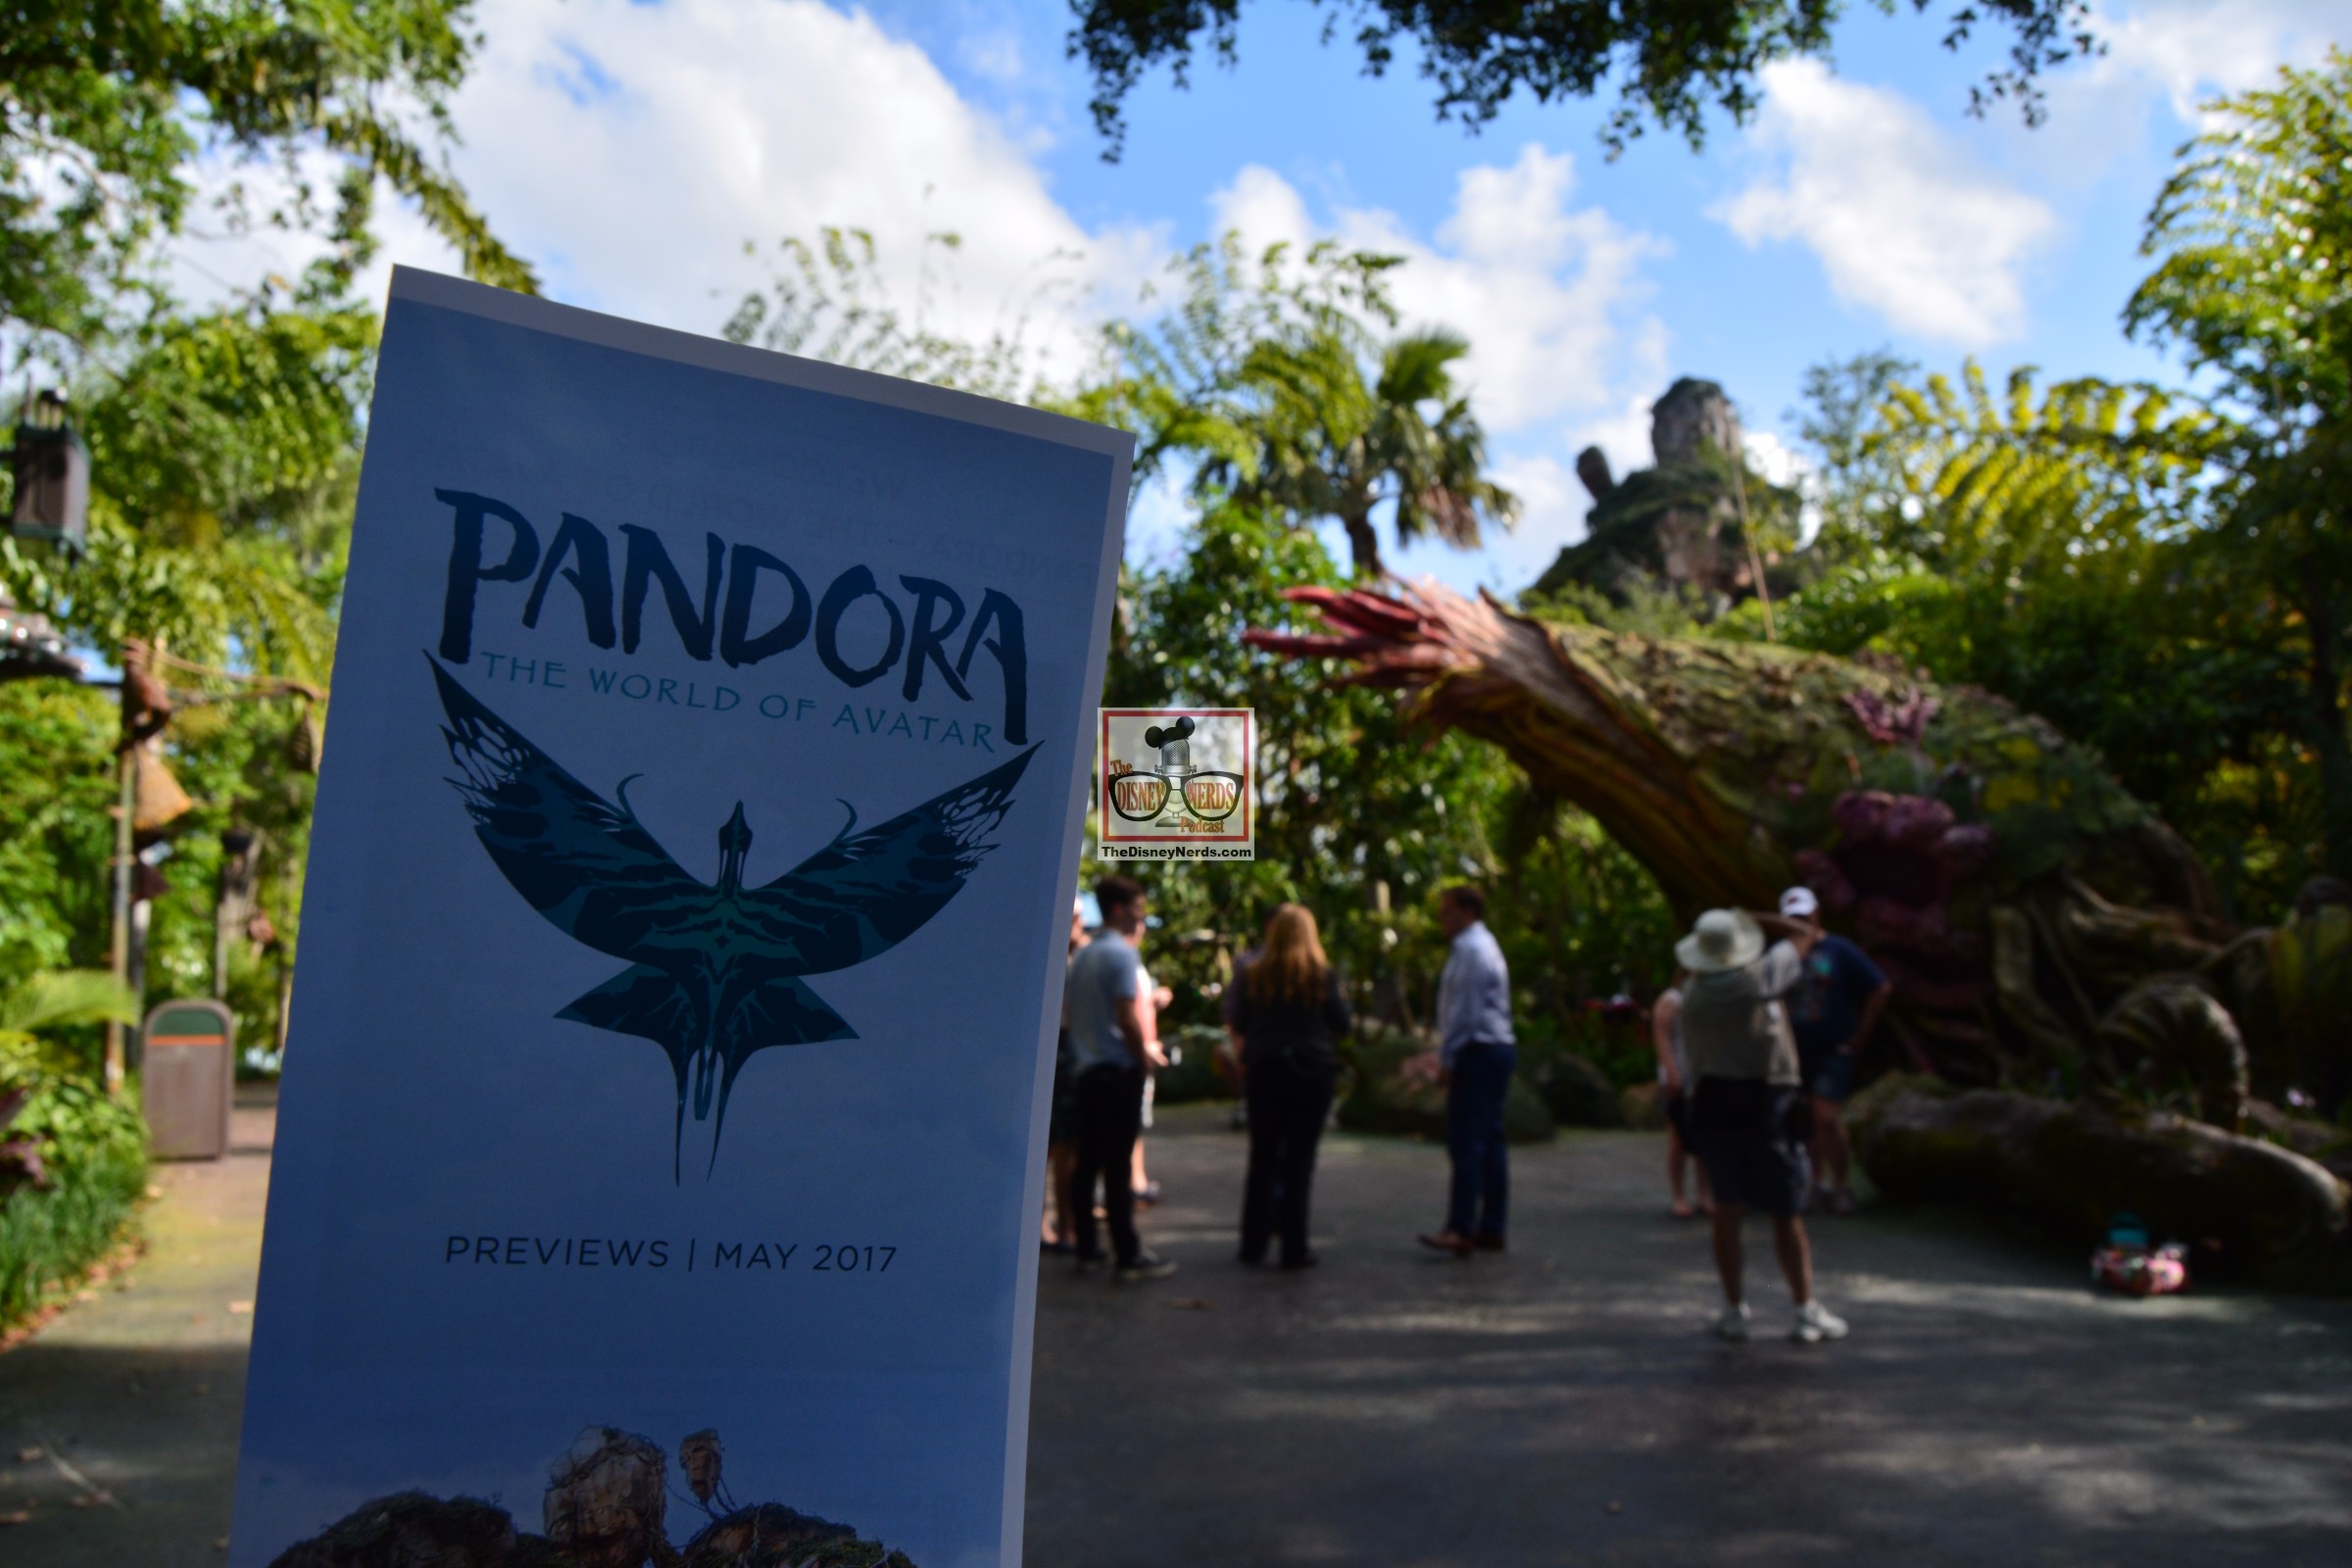 Pandora The World of Avatar Preview